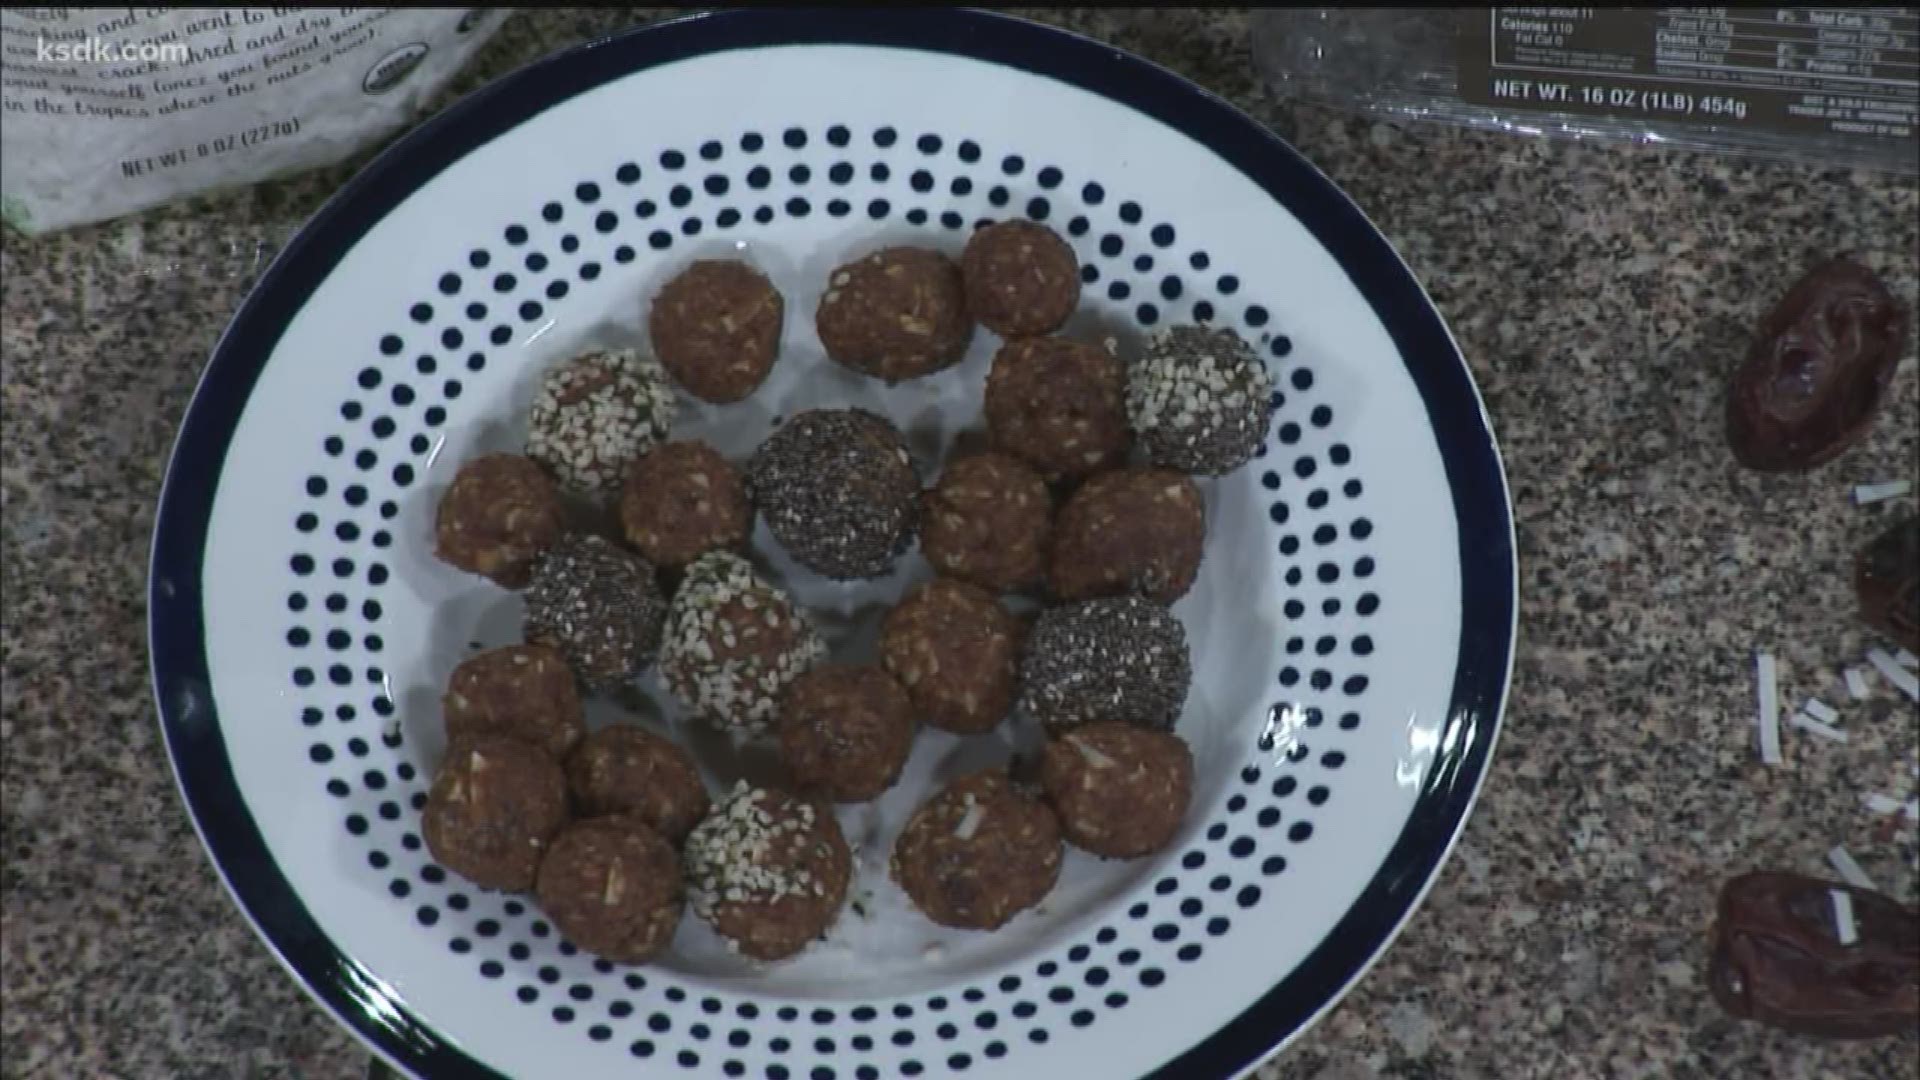 Fall weather means fall recipes! Alexandra Caspero of Delish Knowledge demonstrated a recipe for pumpkin pie flavored energy bites.